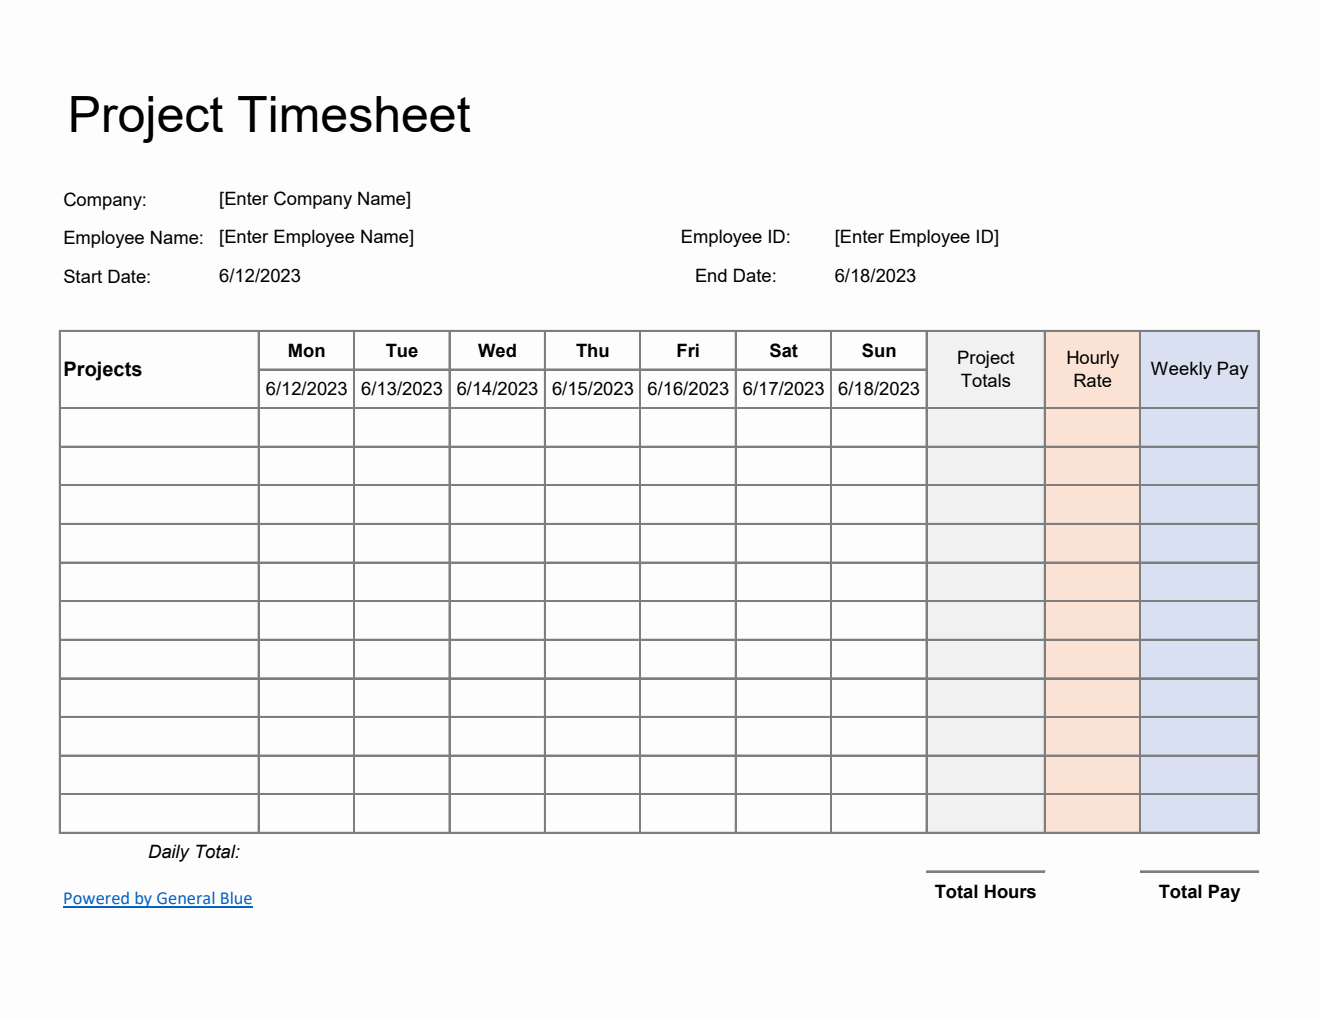 Plain Project Timesheet in Excel